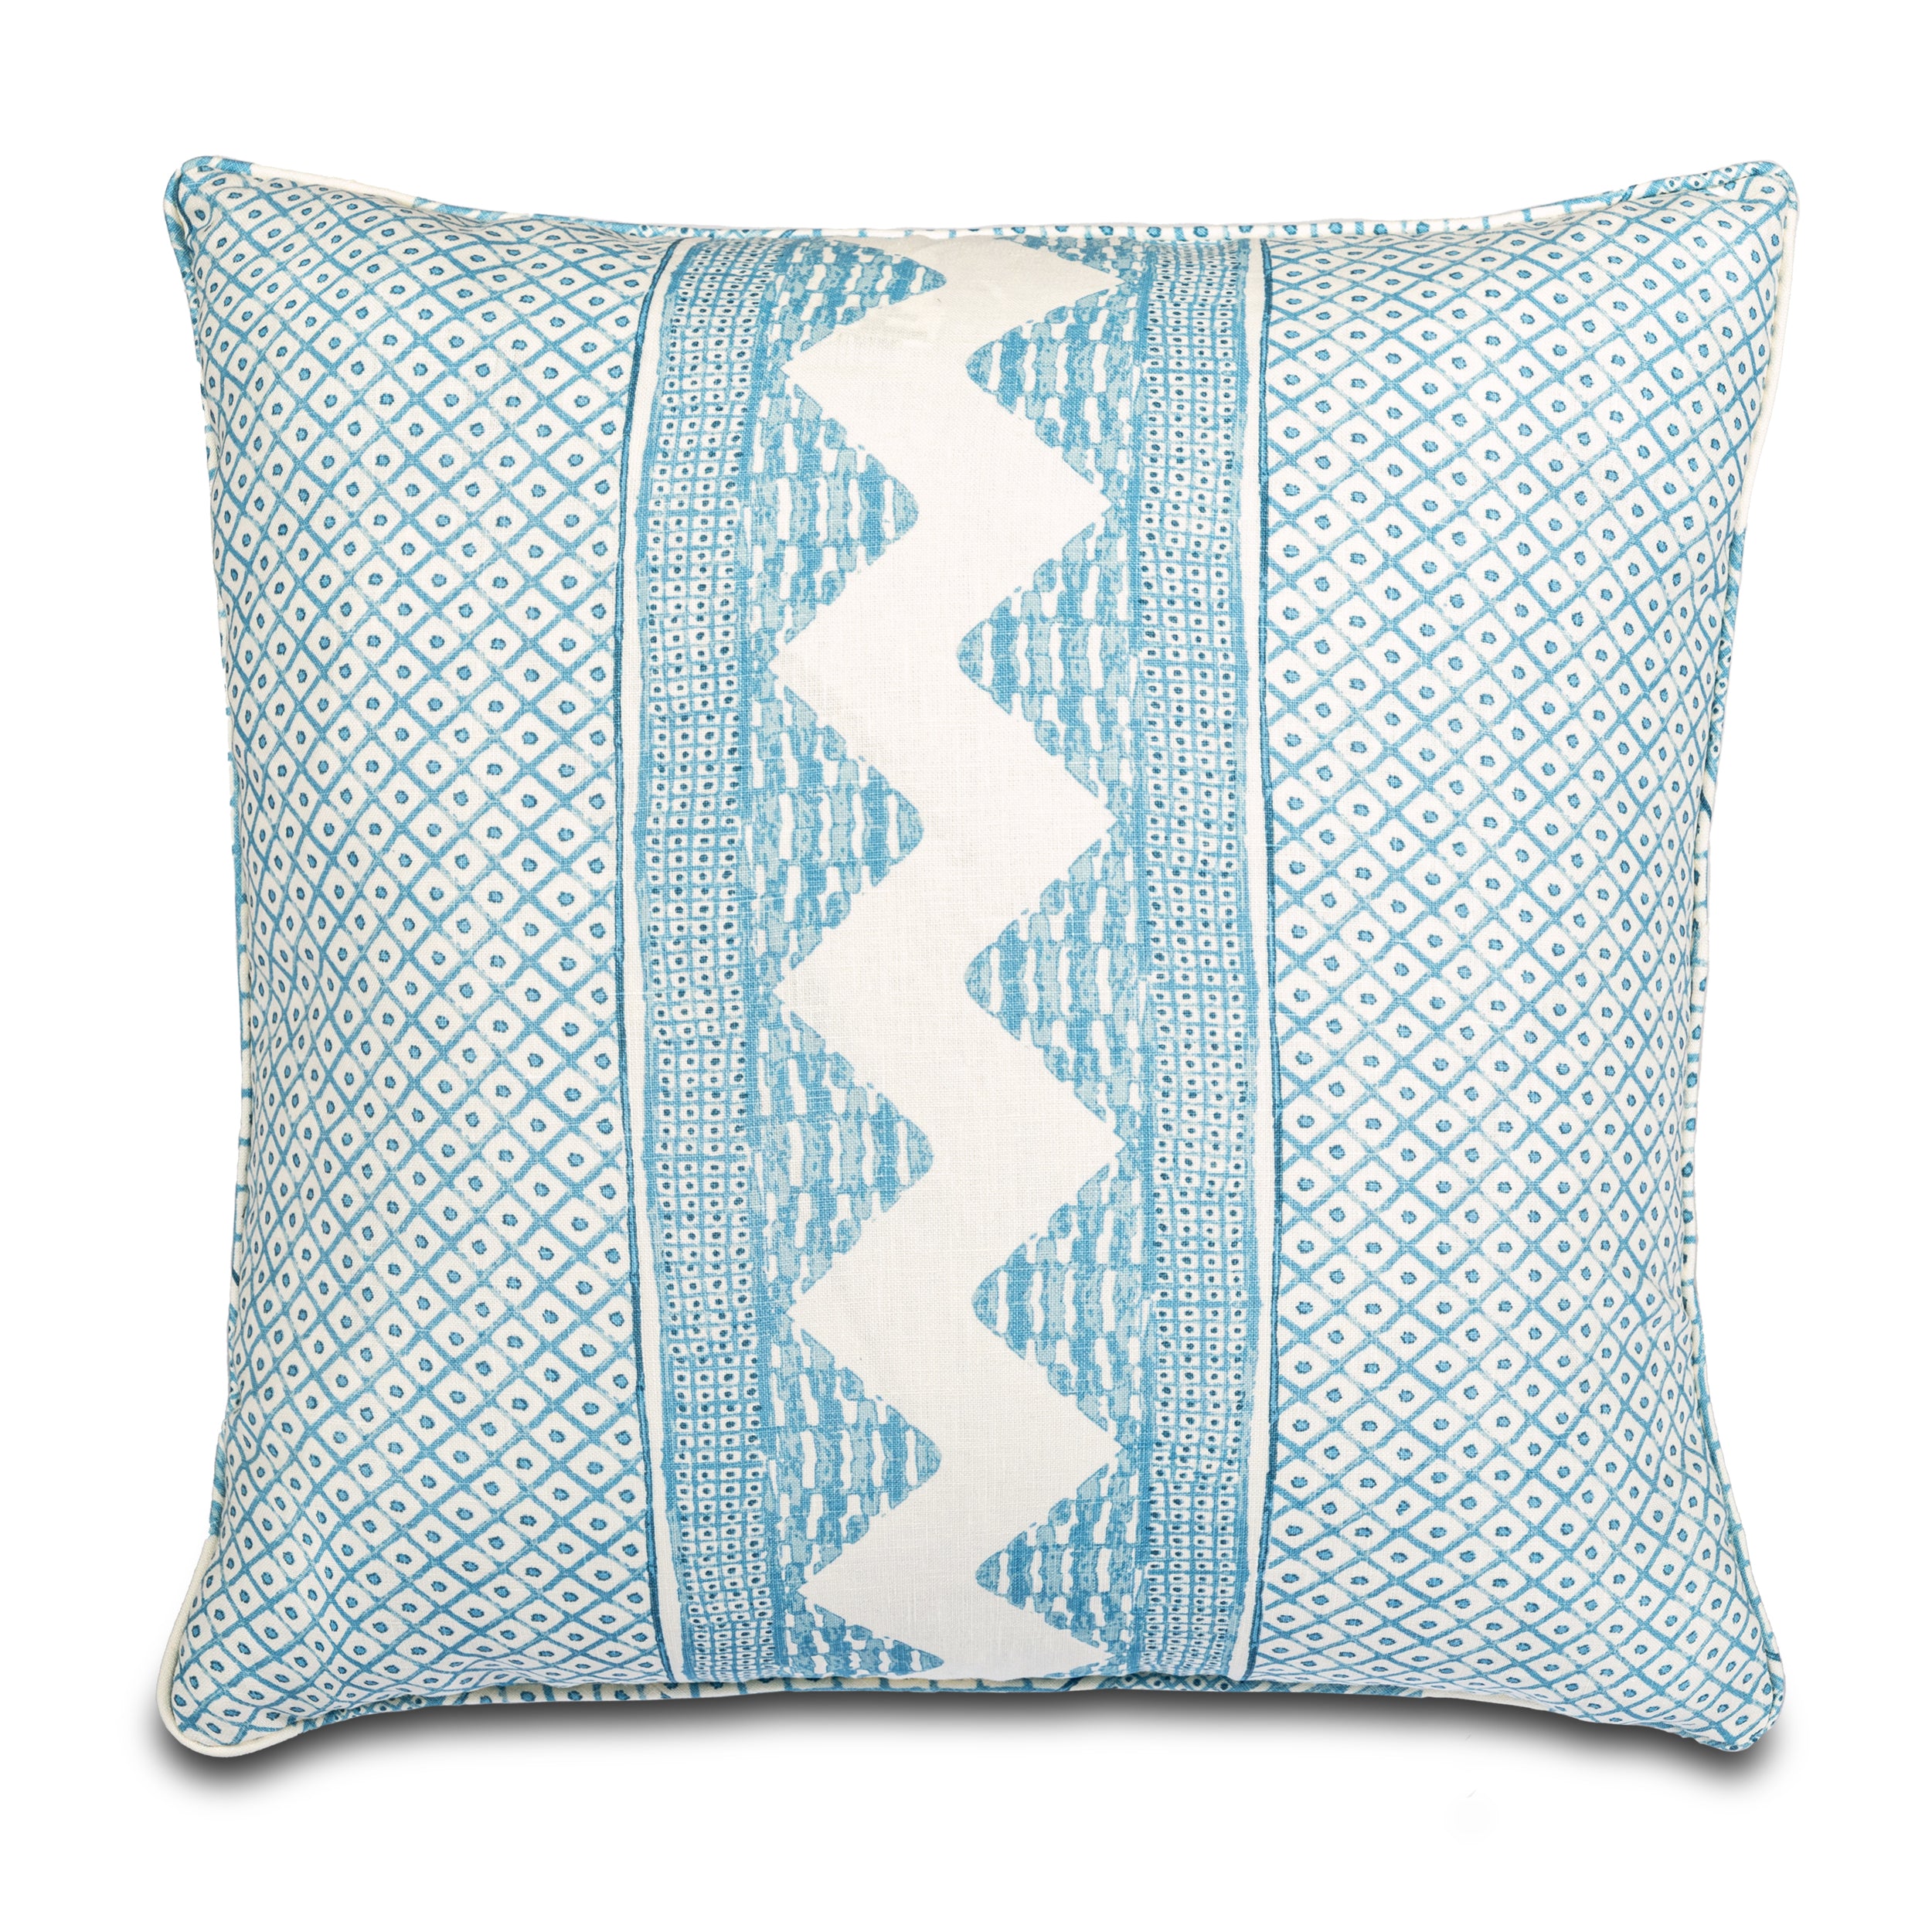 Whitaker Sky Blue Ikat Throw Pillow by Kevin Francis Design | Luxury Home Decor